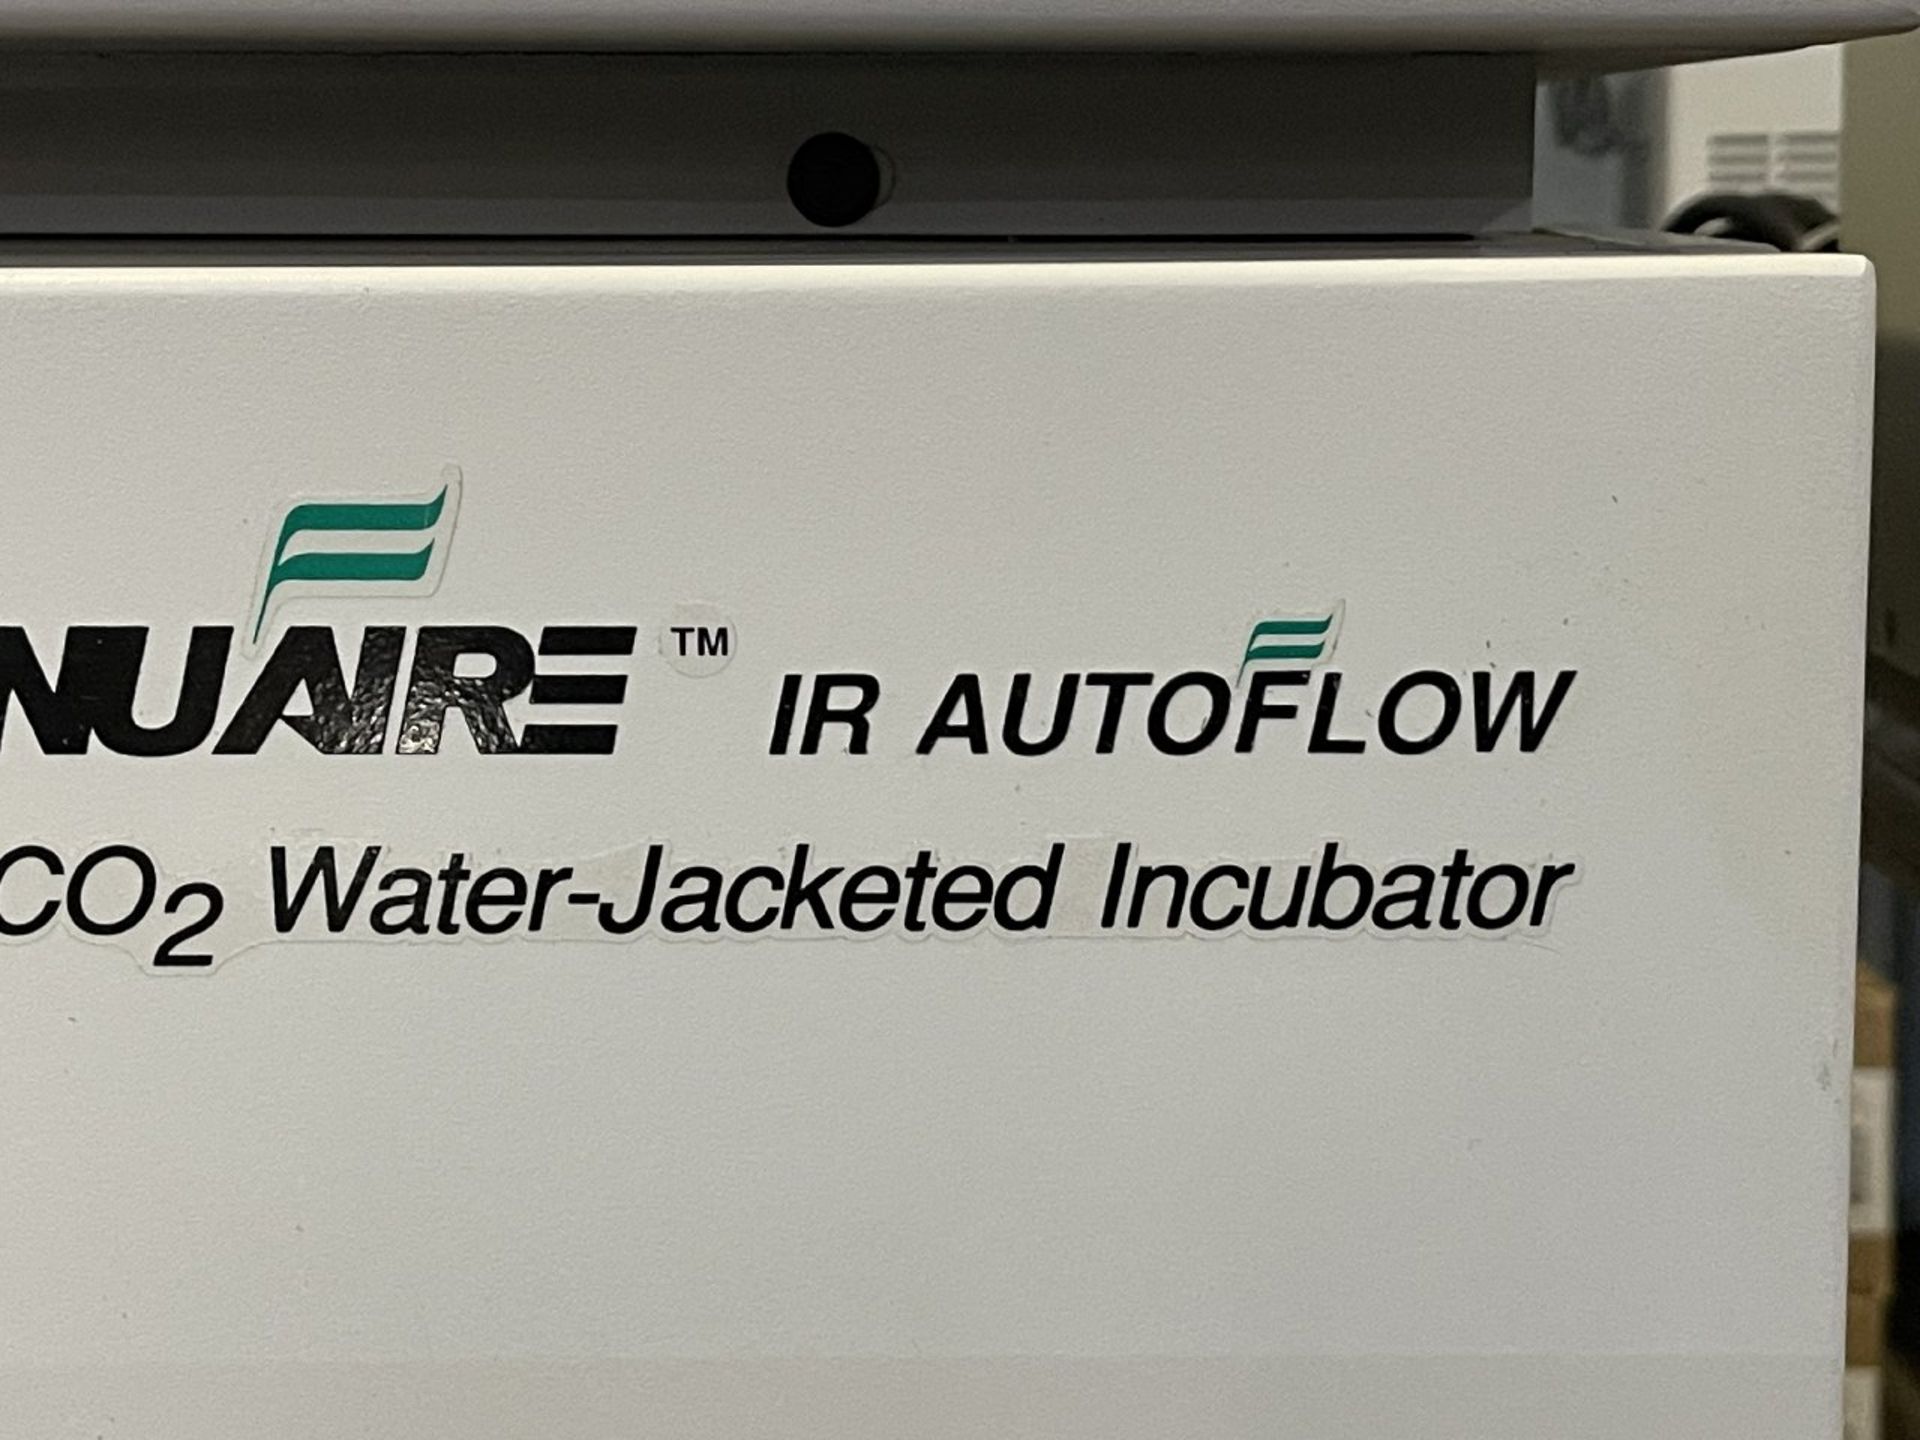 Nuaire IR Auto Flow CO2 Water-Jacketed Incubator - Image 2 of 5